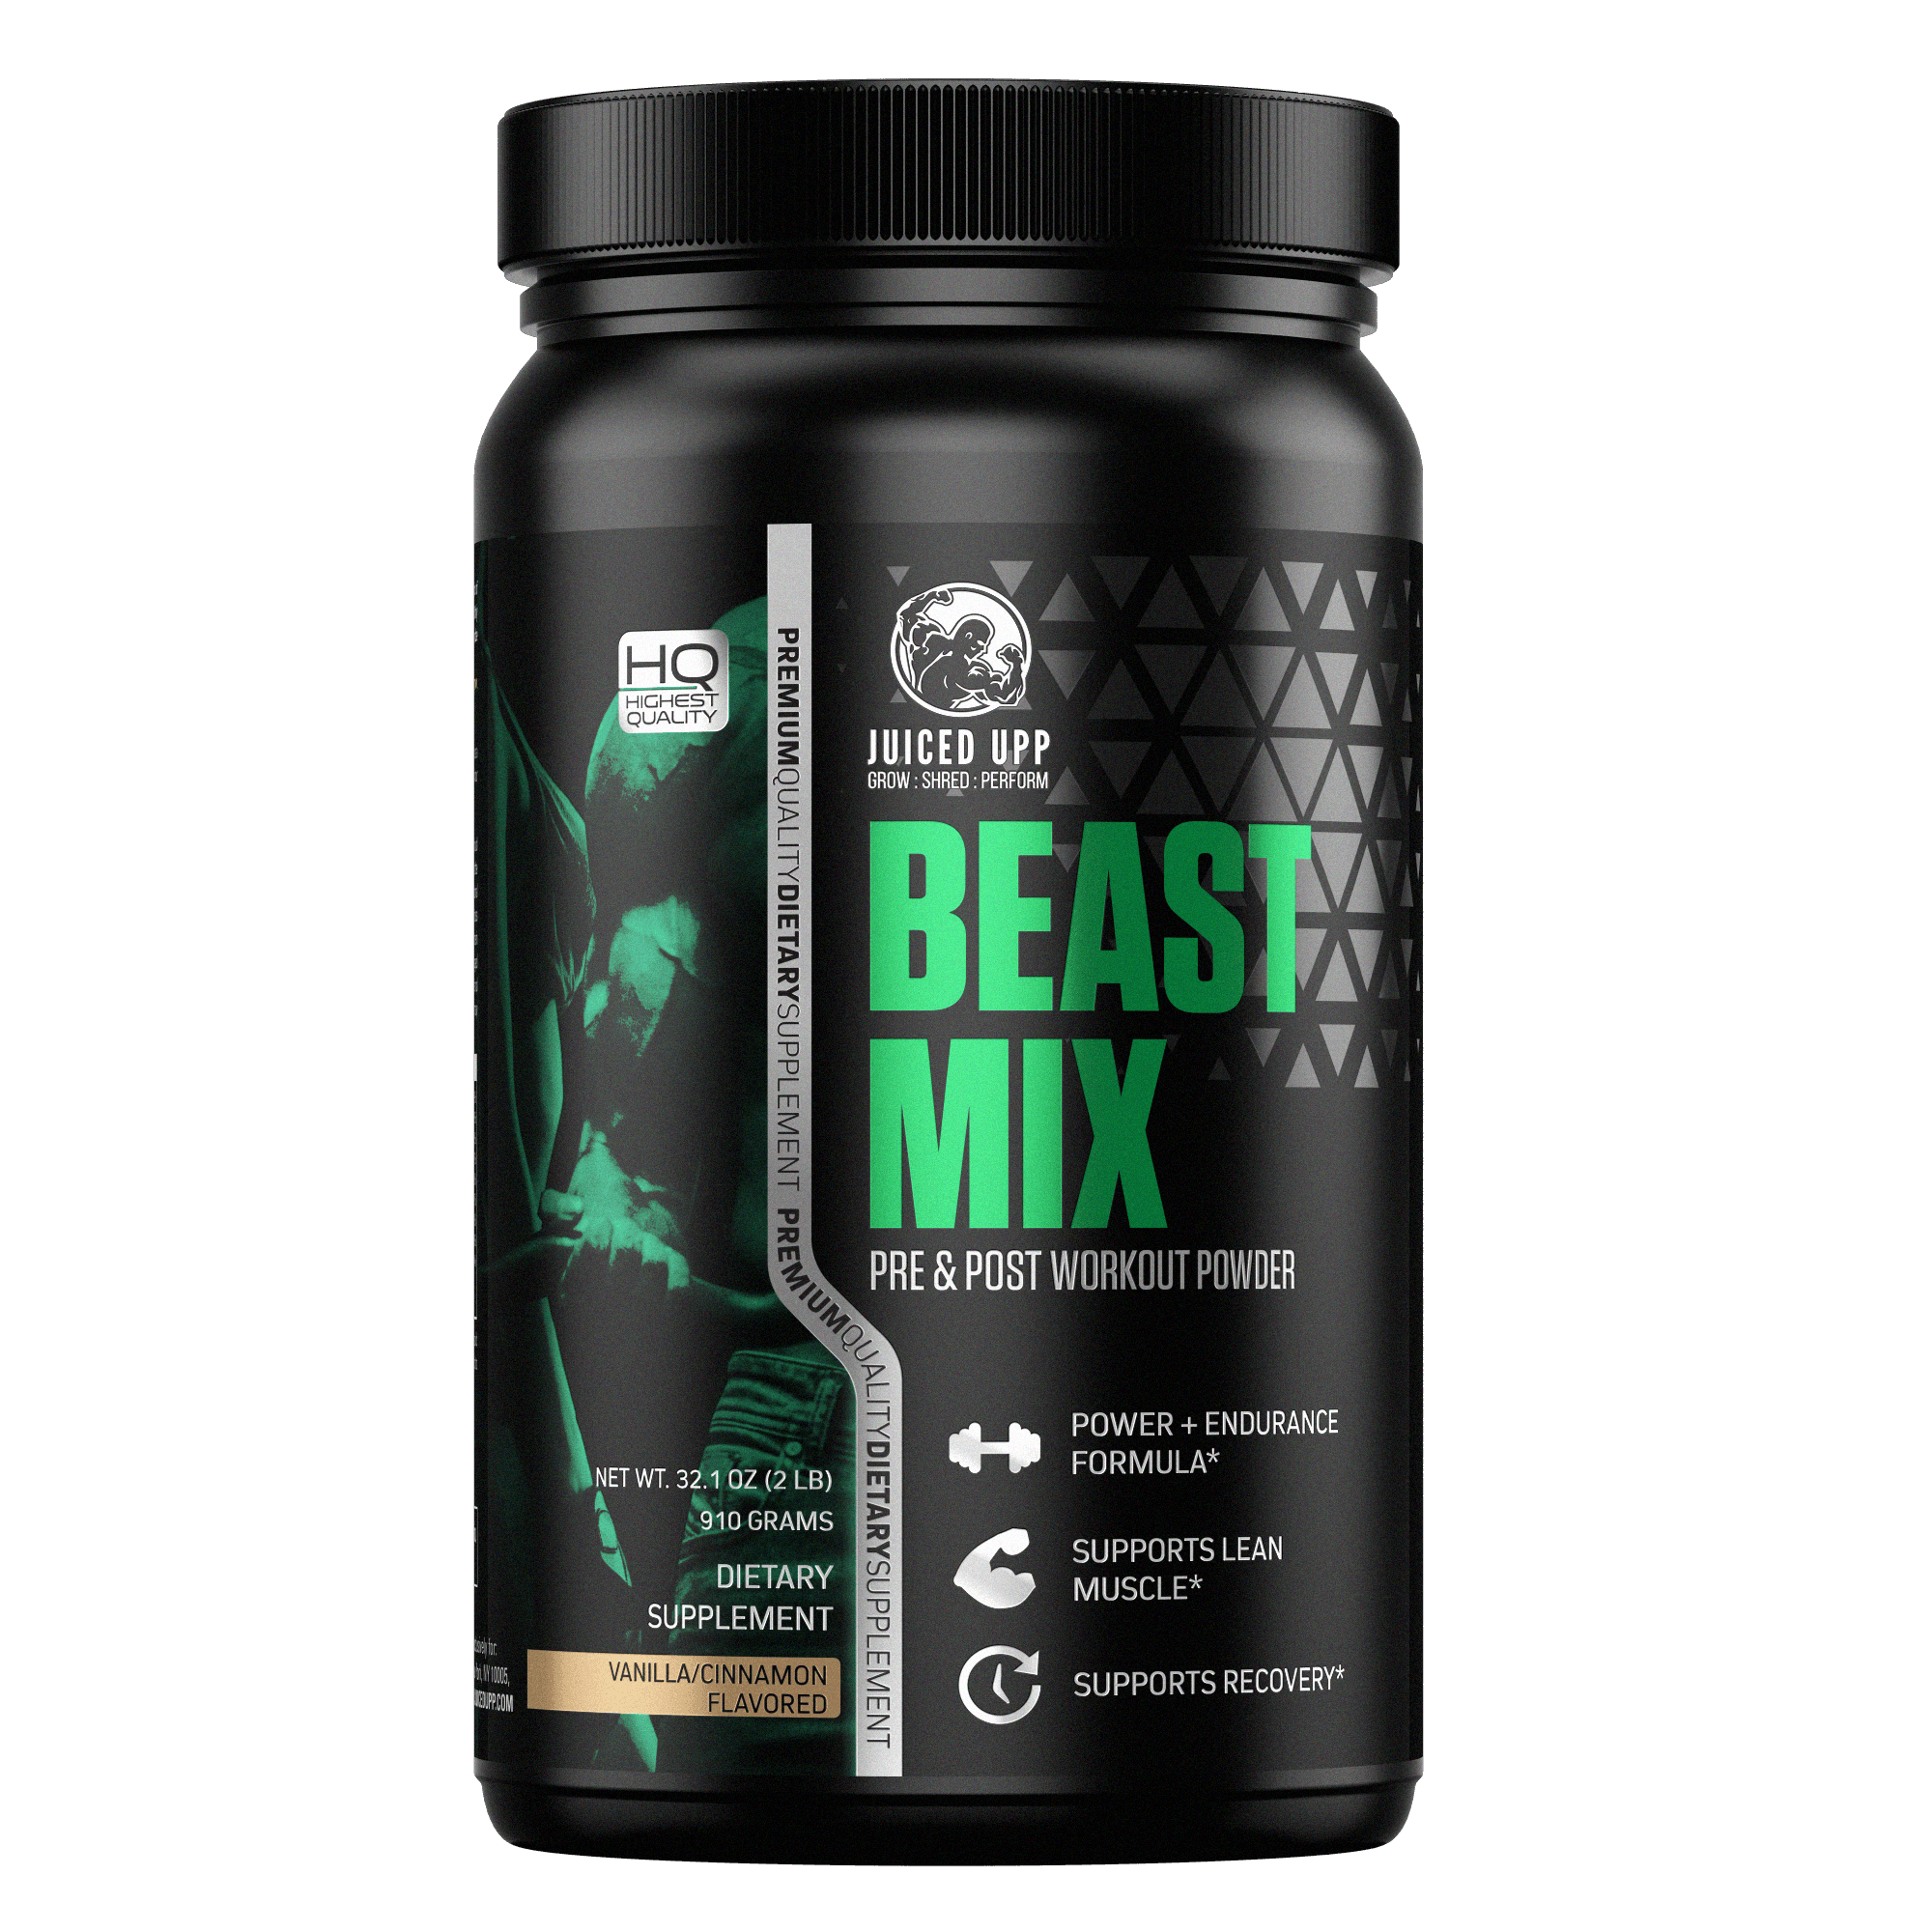 BEAST MIX - Juiced Upp - 100% Natural Fitness and Wellbeing Supplements